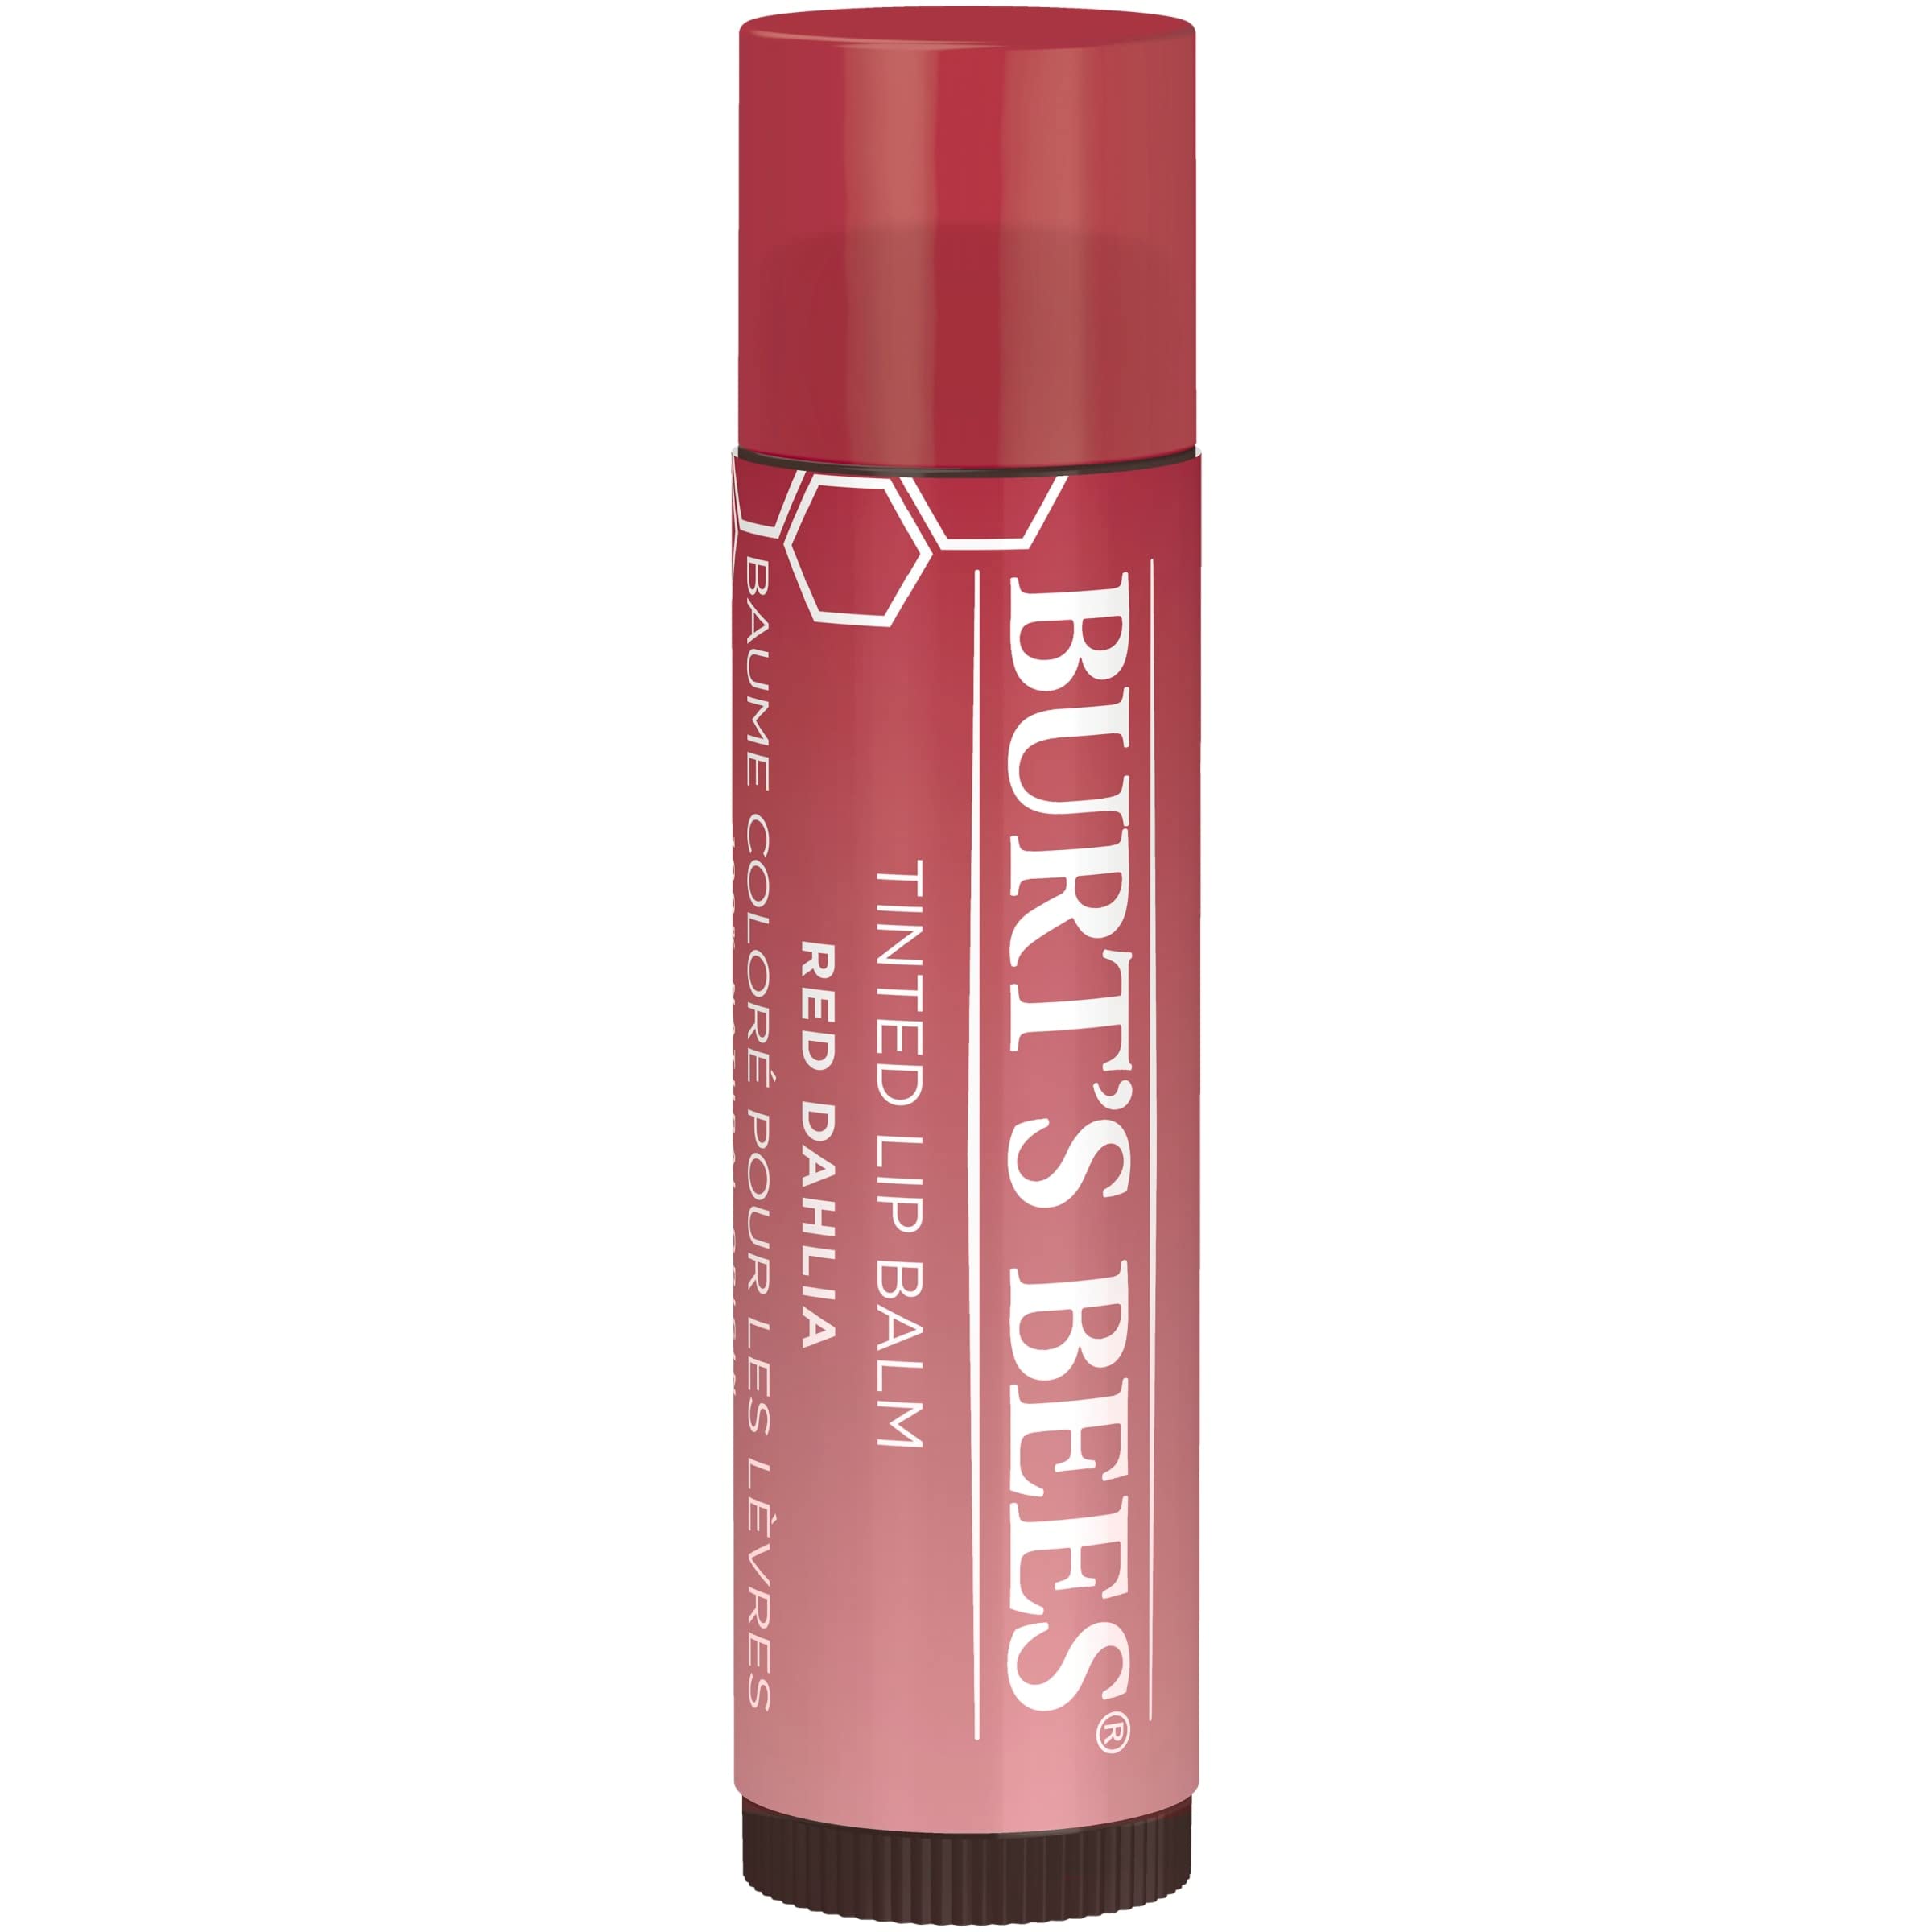 Burt's Bees Lip Balm, Tinted Moisturizing Lip Care for Women, 100% Natural, with Shea Butter, Red Dahlia (2 Pack)